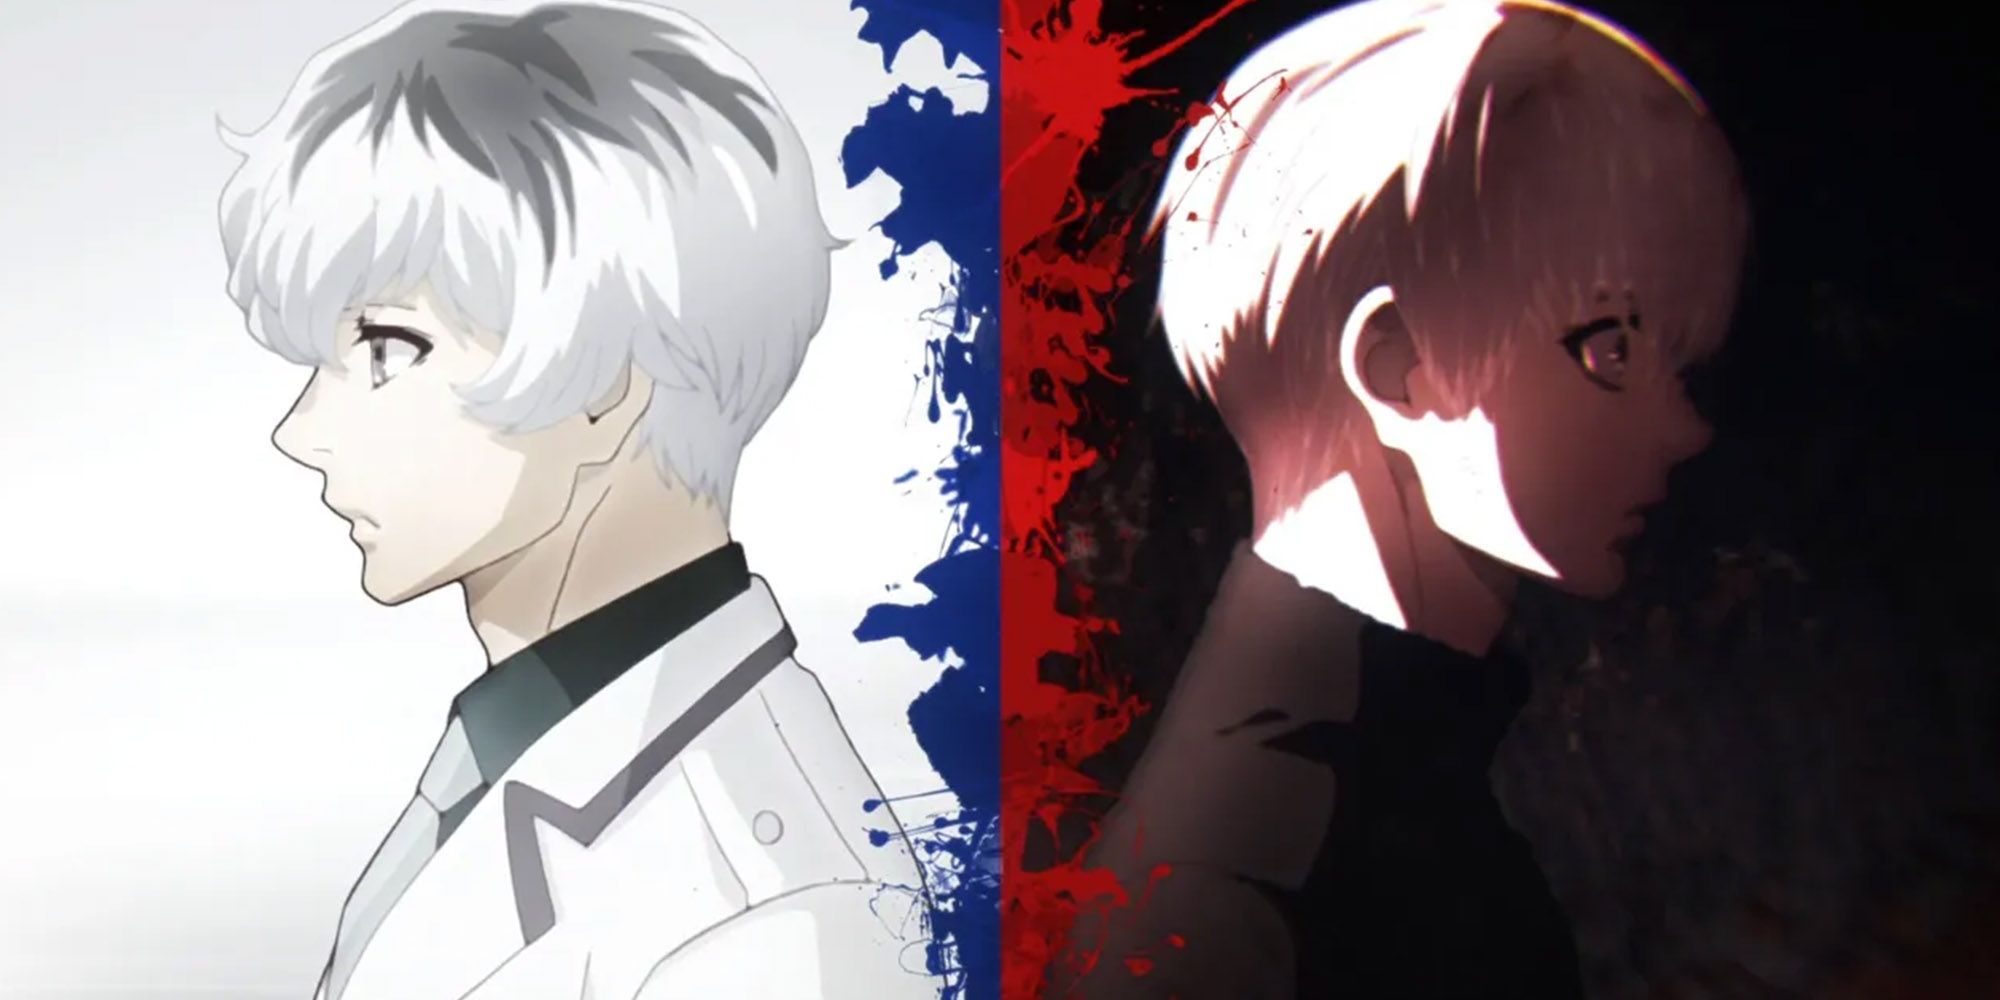 Tokyo Ghoul - Ken Kaneki And His Alter Ego From Tokyo Ghoul Re Back To Back